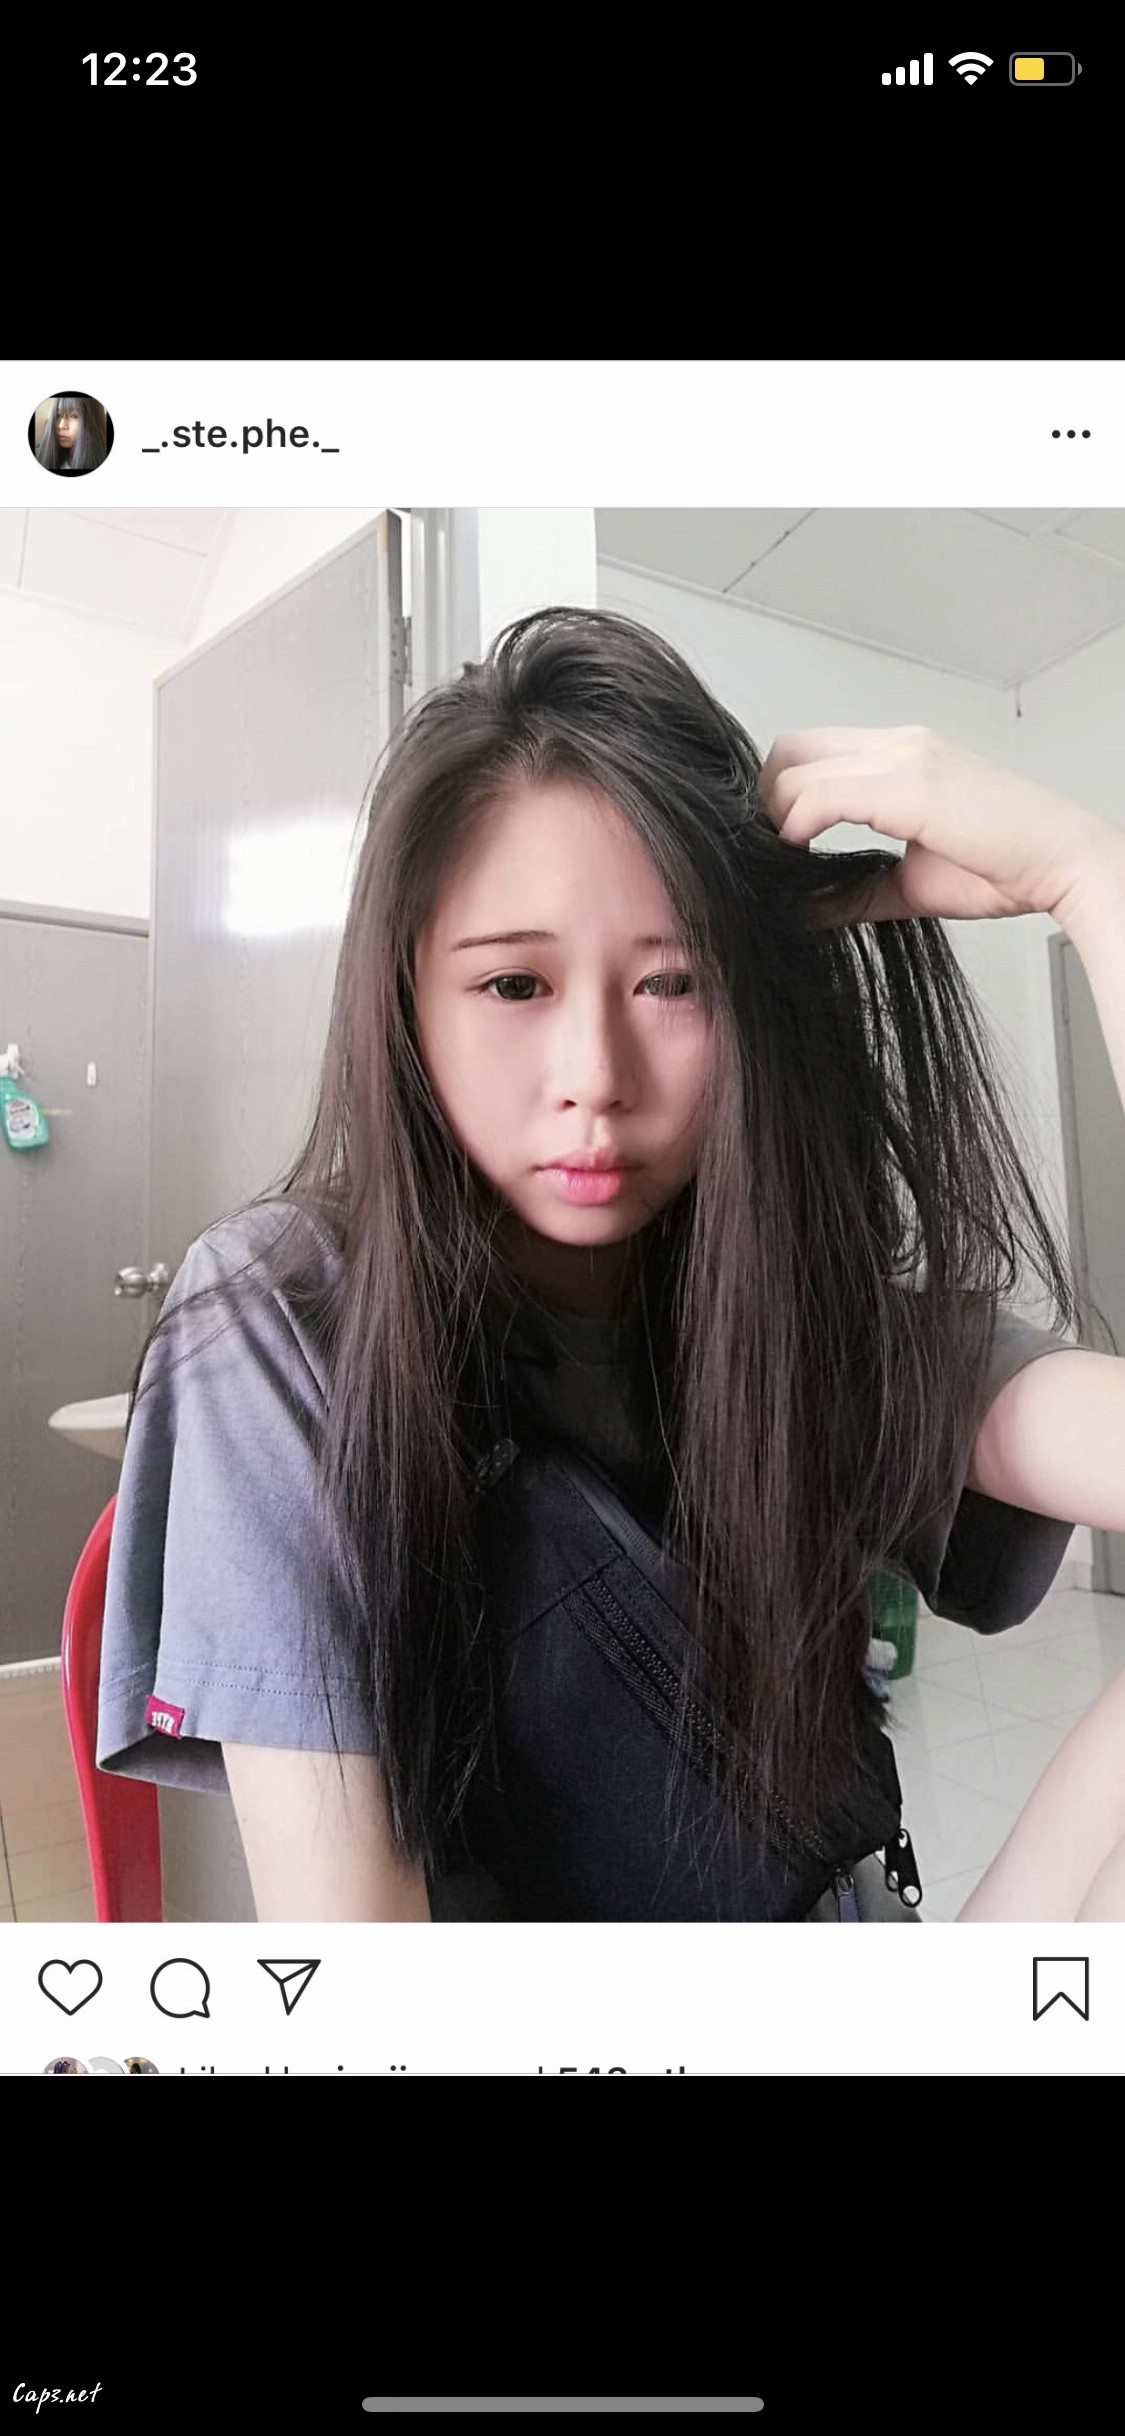 Singapore Girl Ste Phe Leaked Nude The Fappening